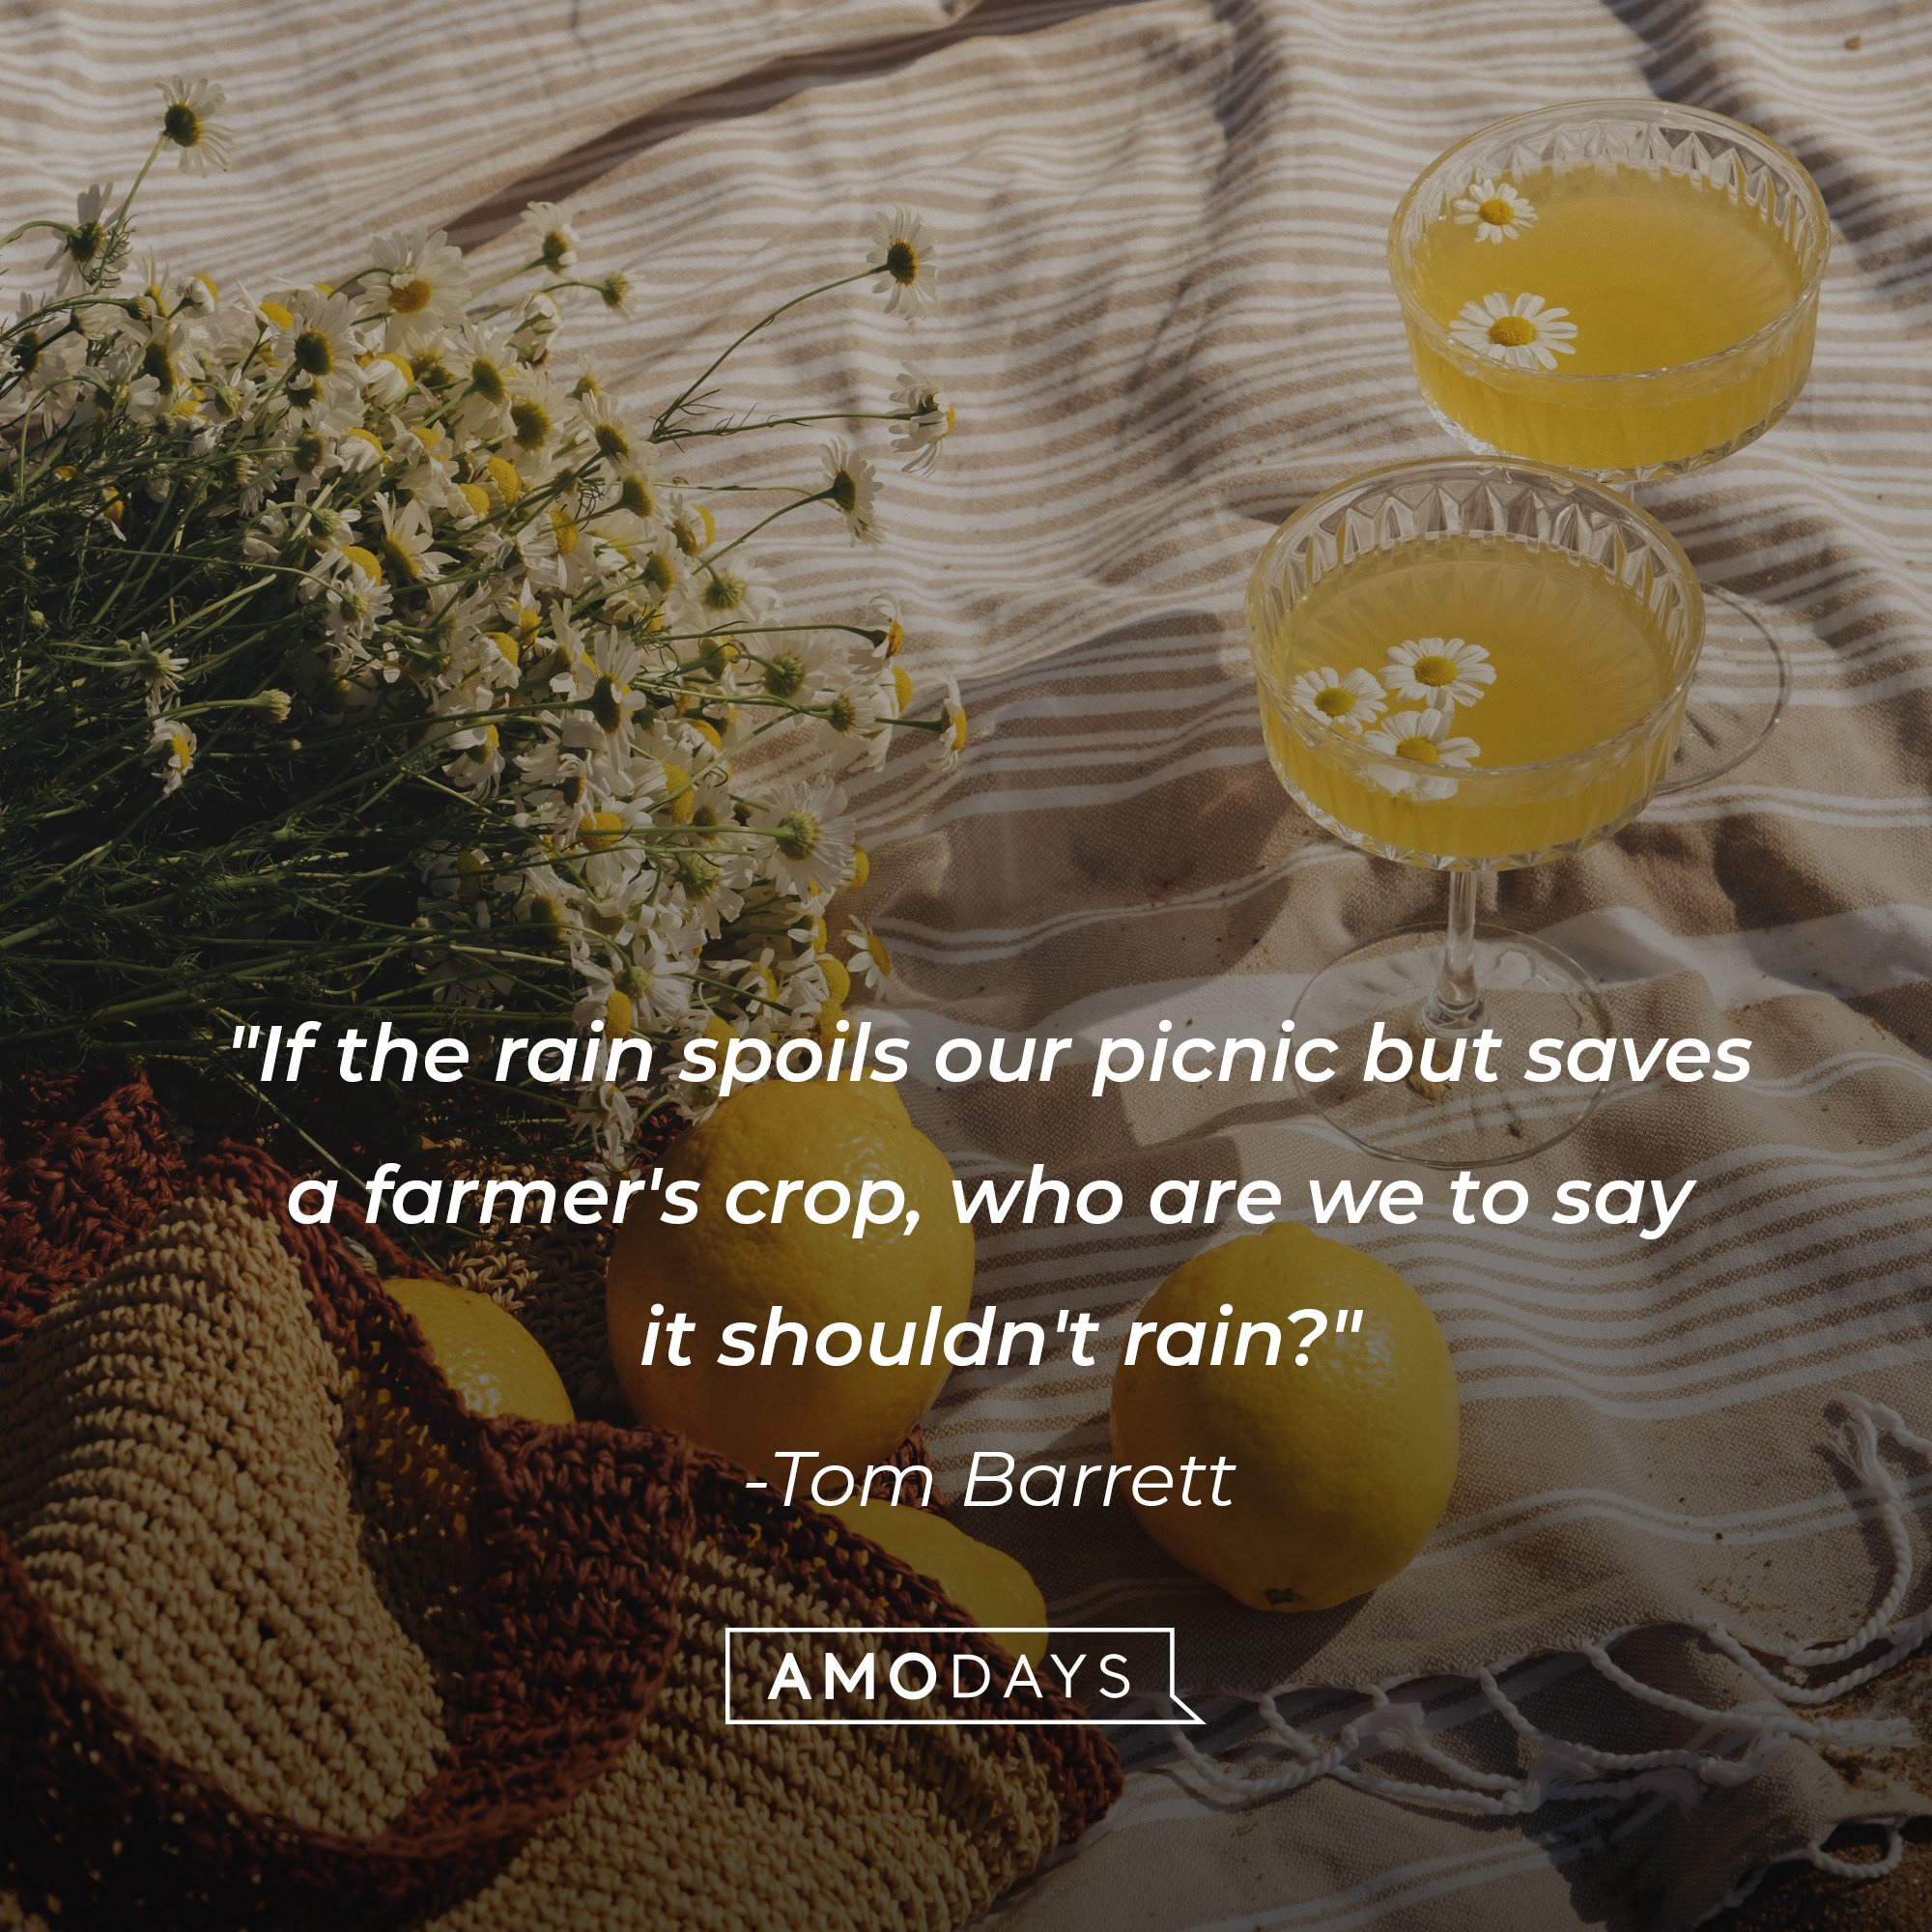 Tom Barrett's quote: "If the rain spoils our picnic but saves a farmer's crop, who are we to say it shouldn't rain?" | Image: AmoDays